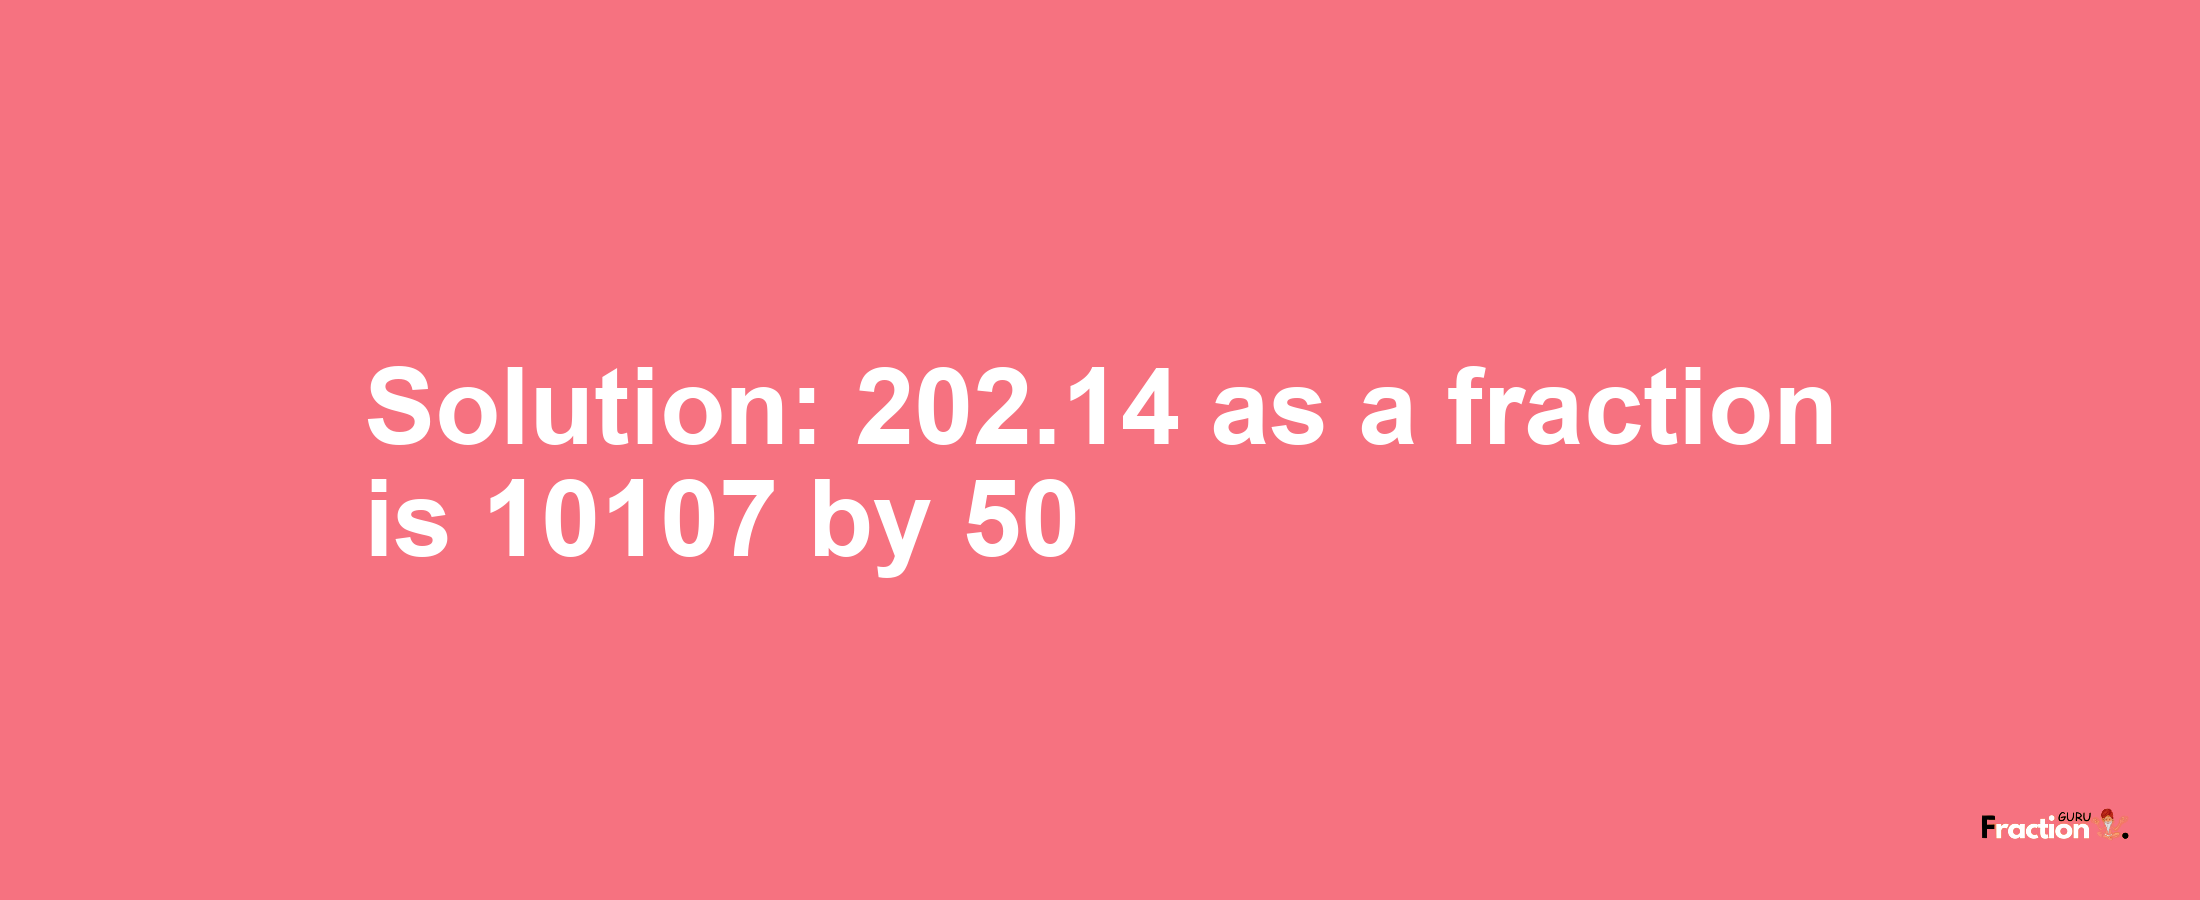 Solution:202.14 as a fraction is 10107/50